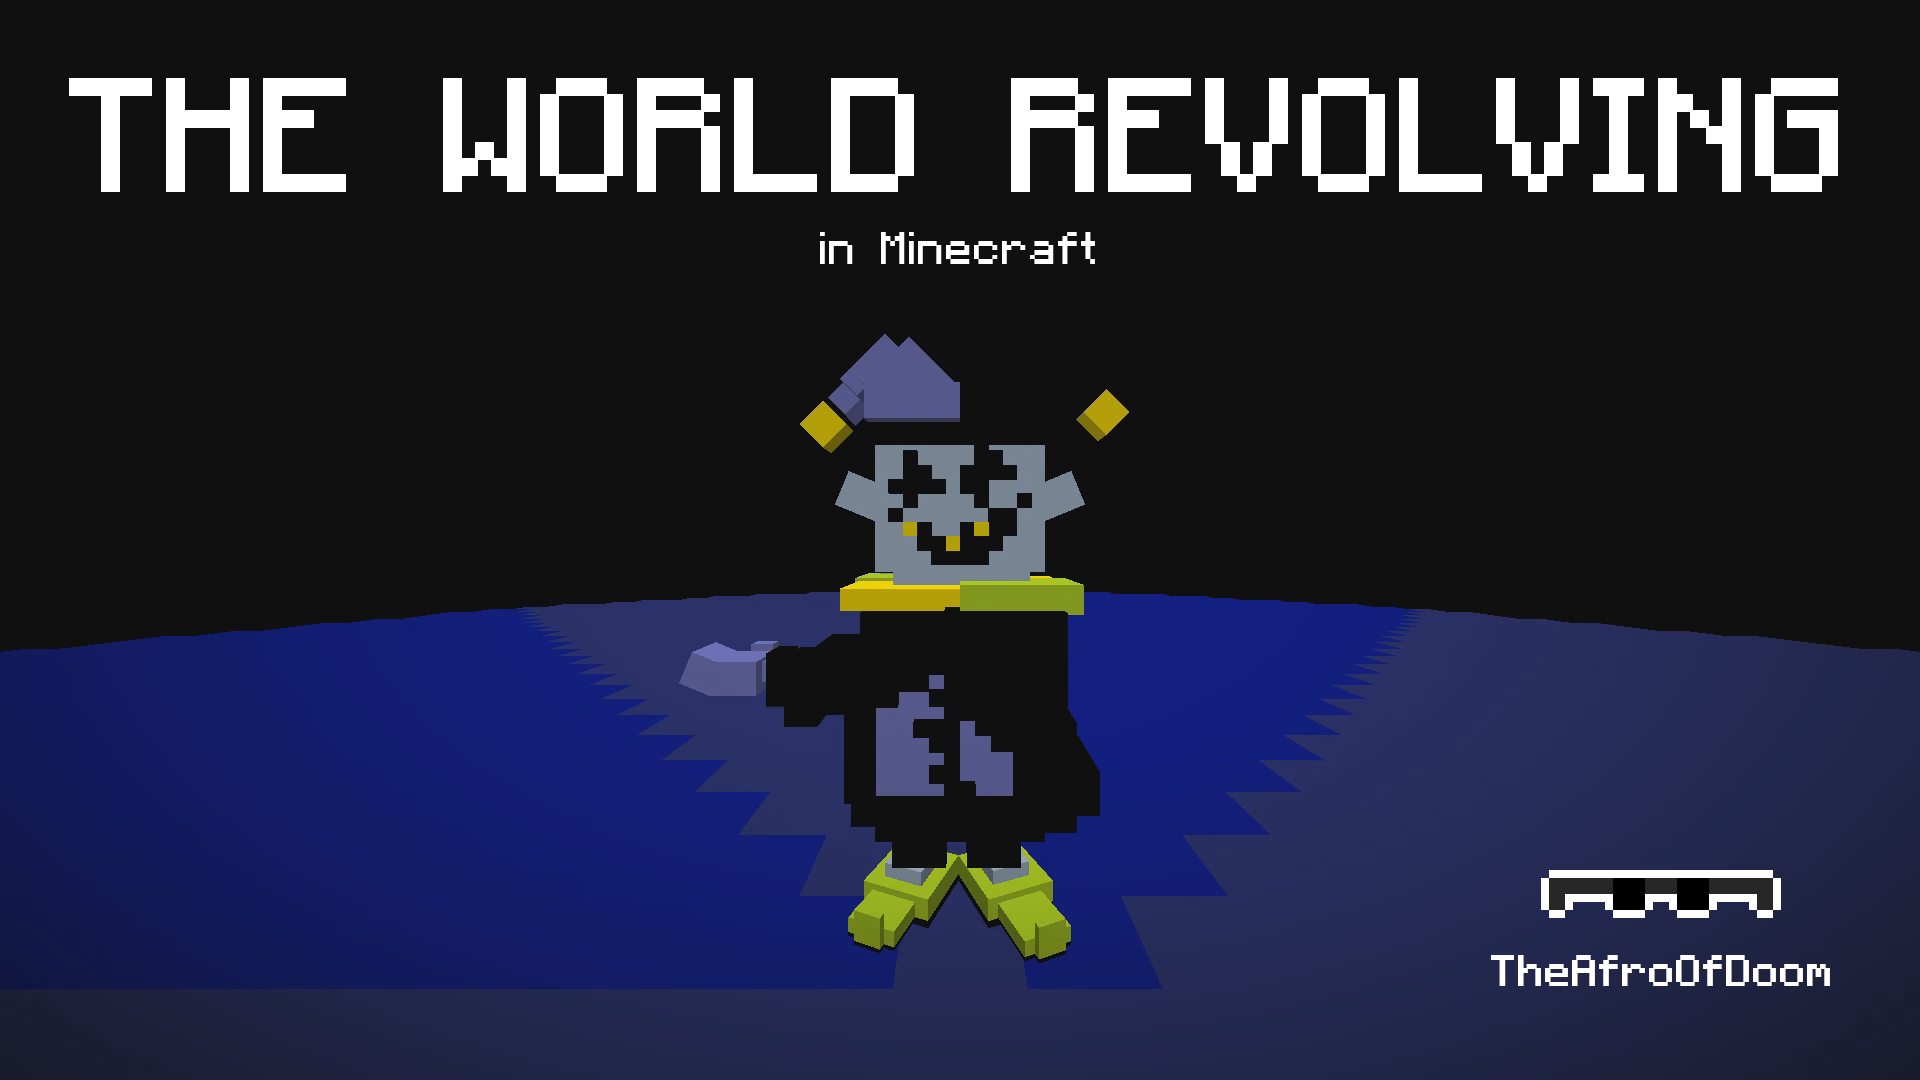 Download THE WORLD REVOLVING for Minecraft 1.14.2